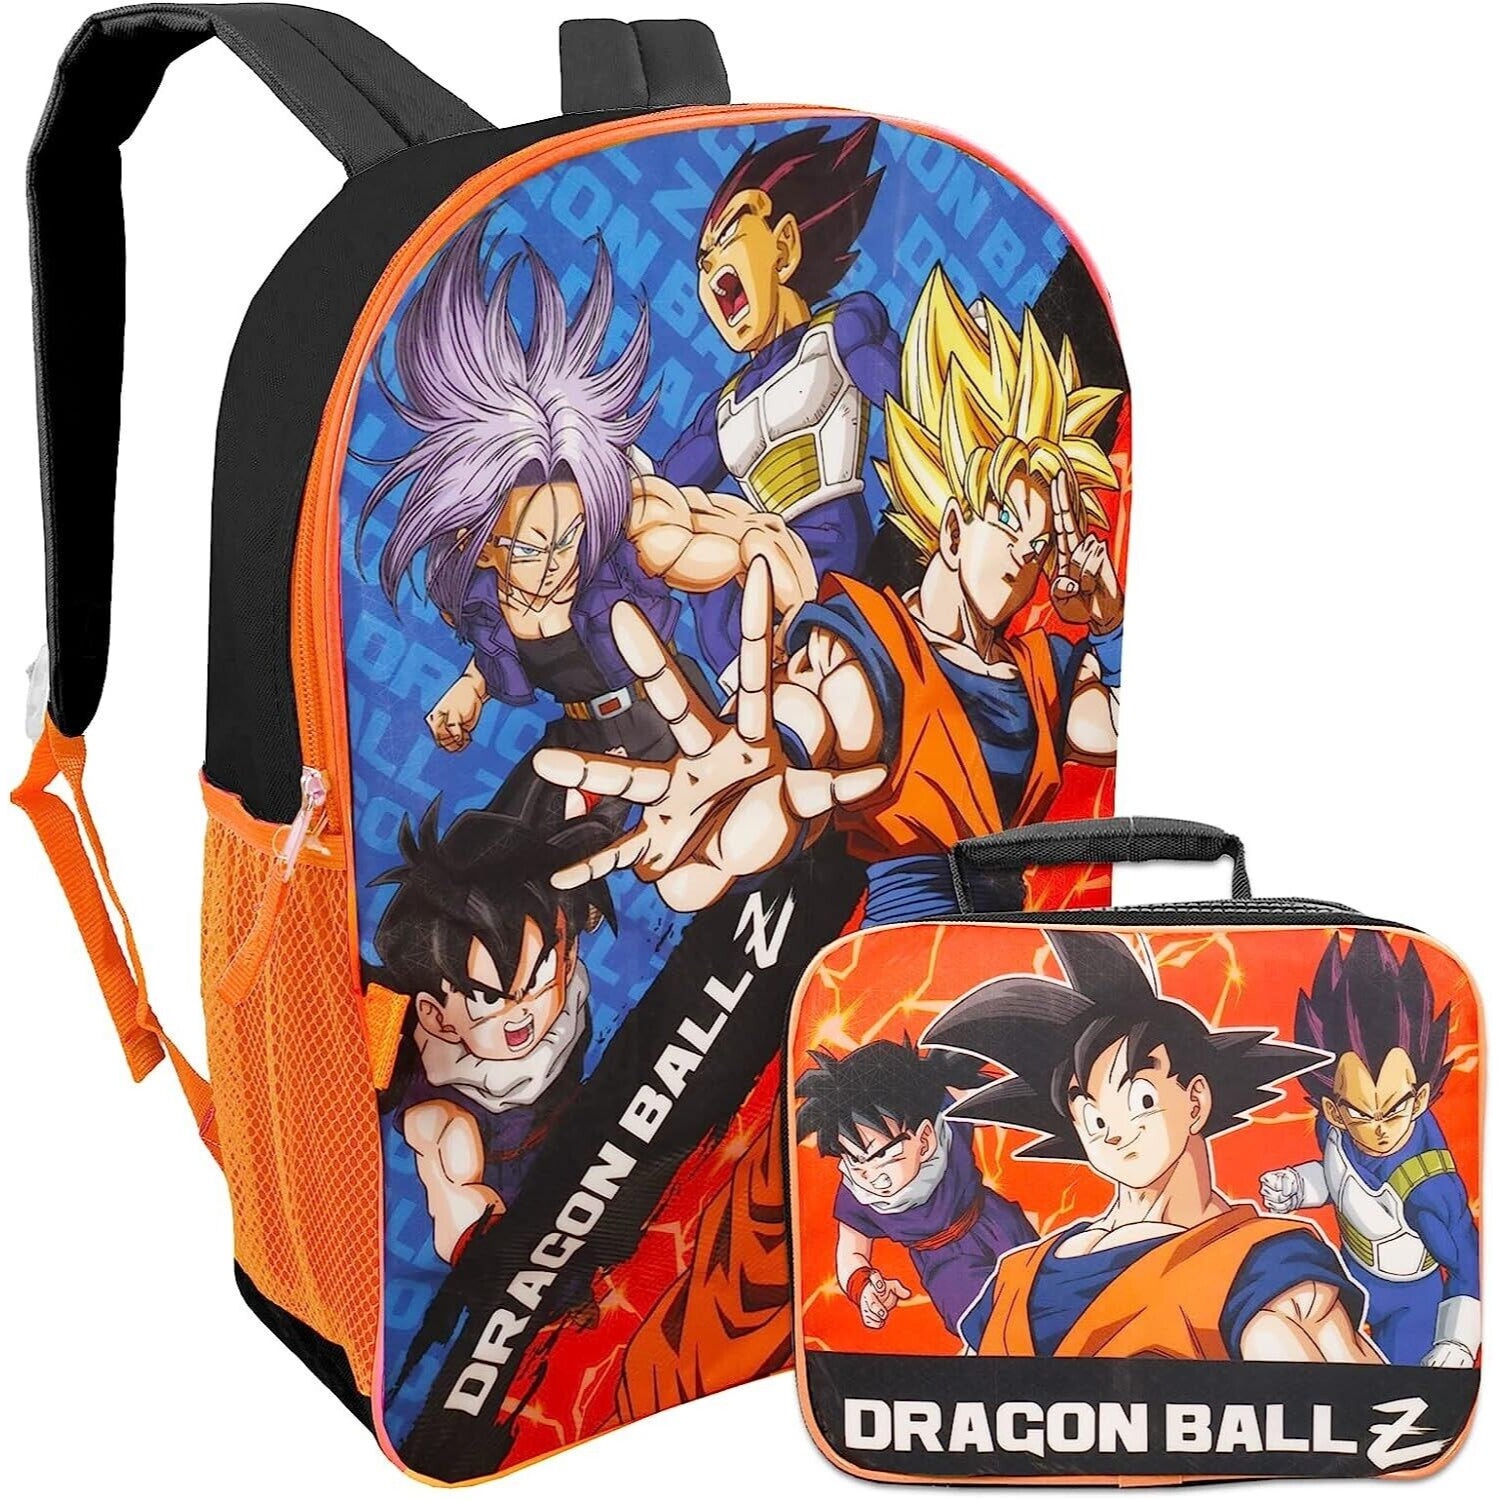 Bioworld Dragon Ball Z Backpack with Lunchbag